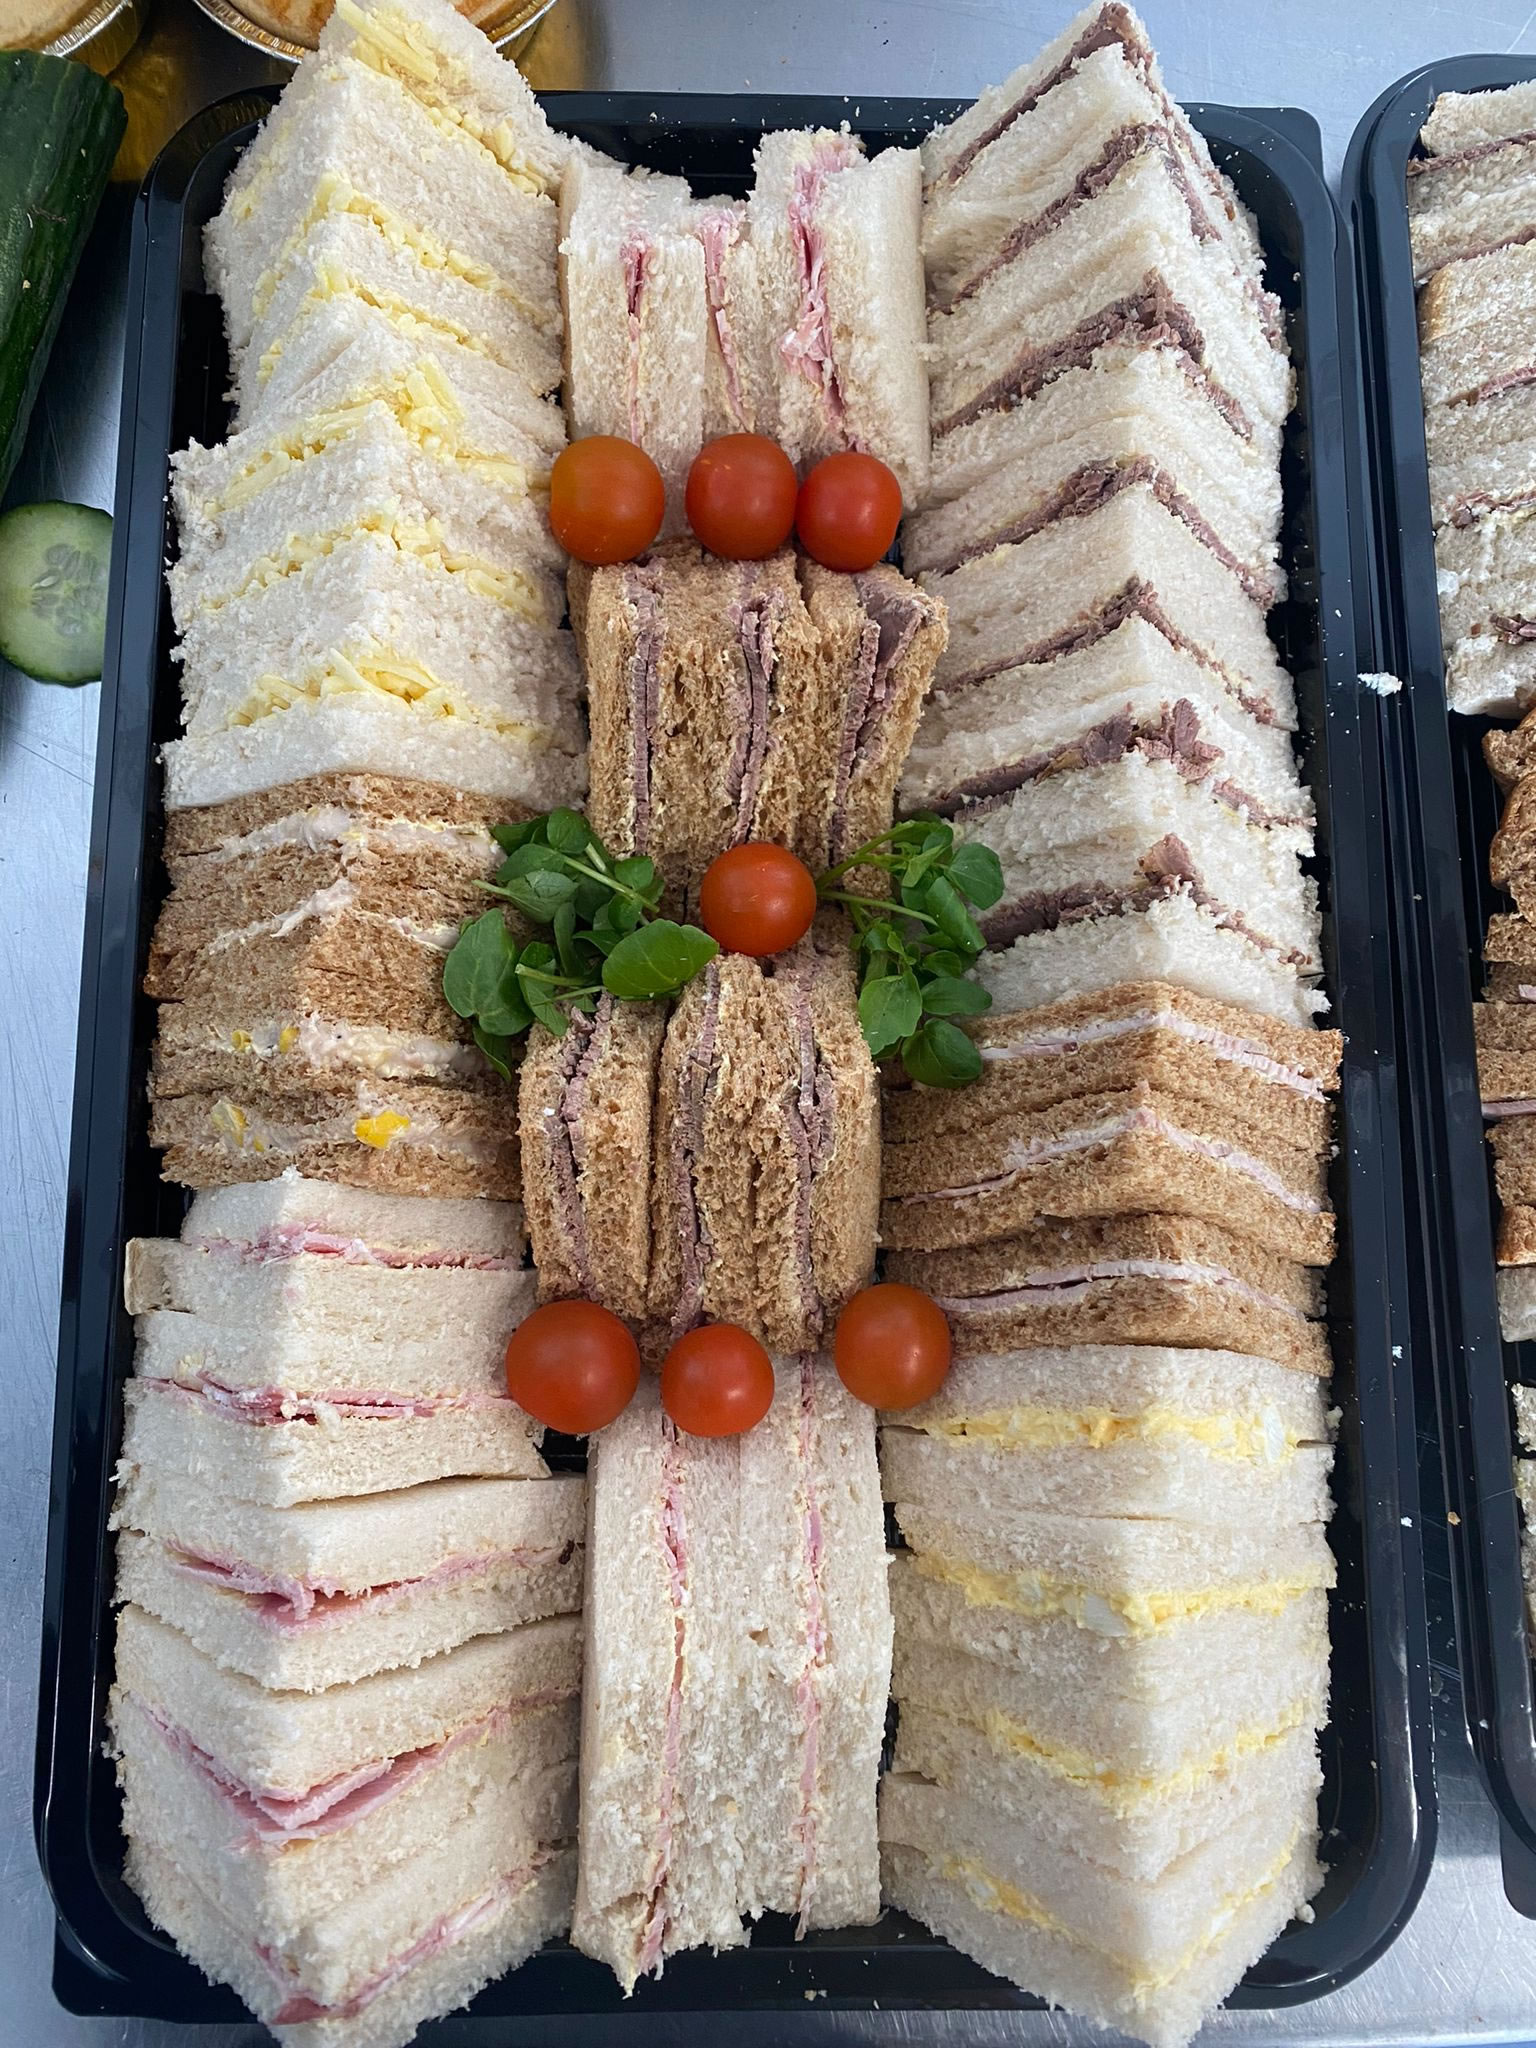 Assorted Sandwiches by Ellesmere Port Catering